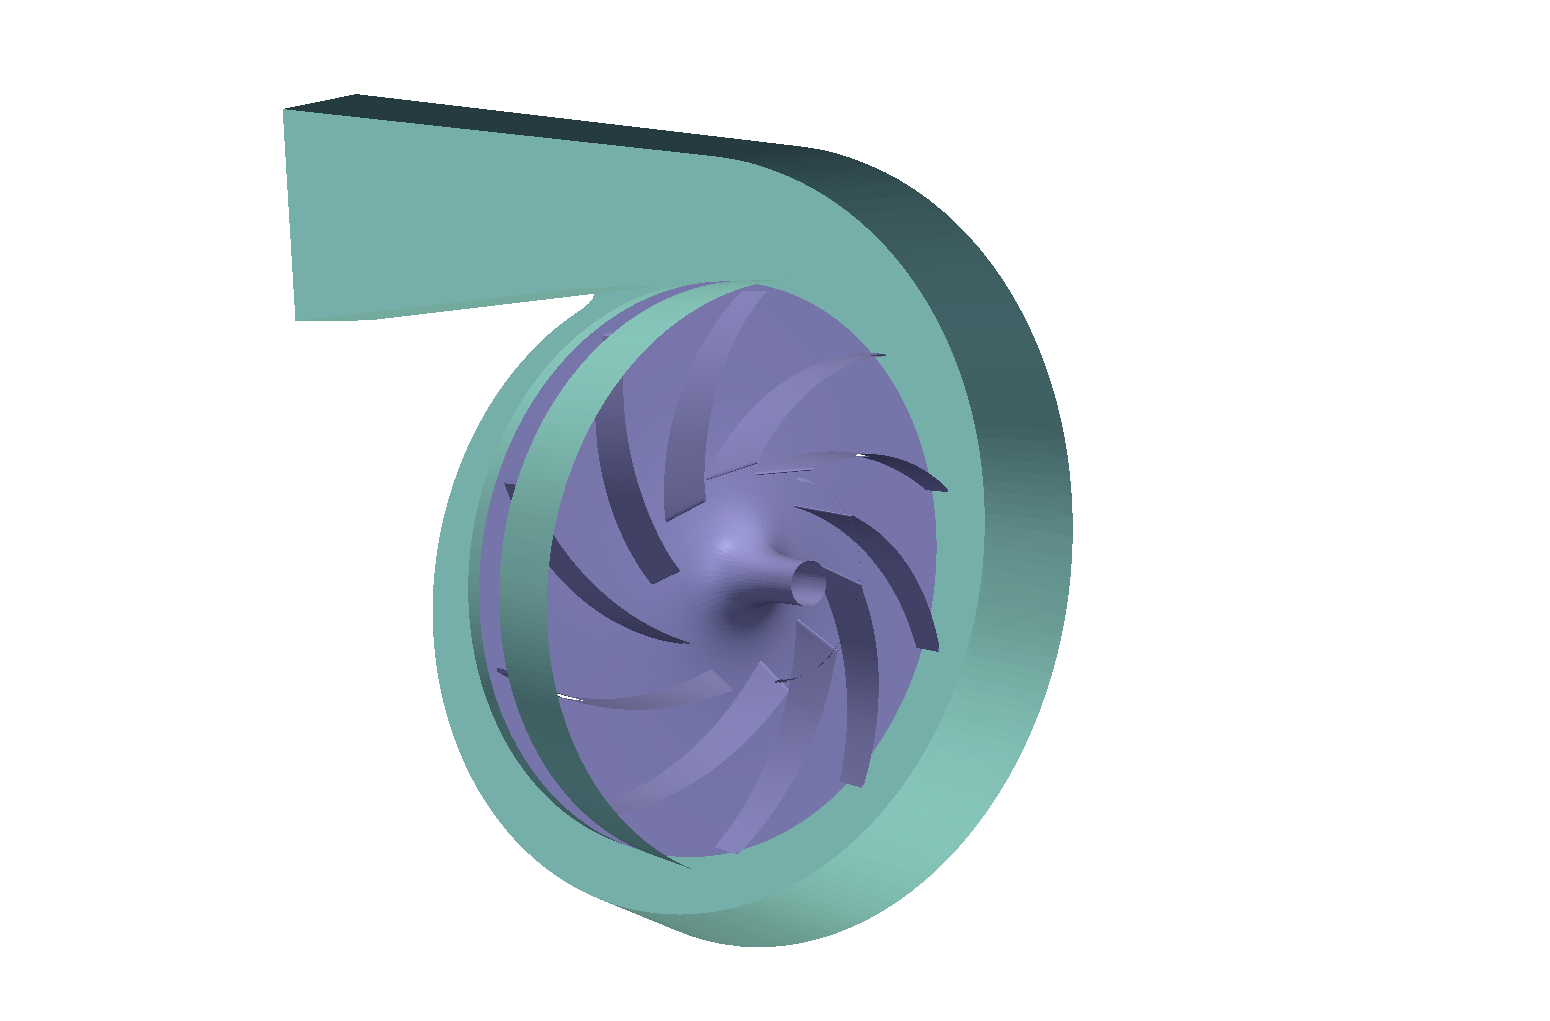 TurbomachineryCFD fan nq28 compressible noHousing rotor stator cull